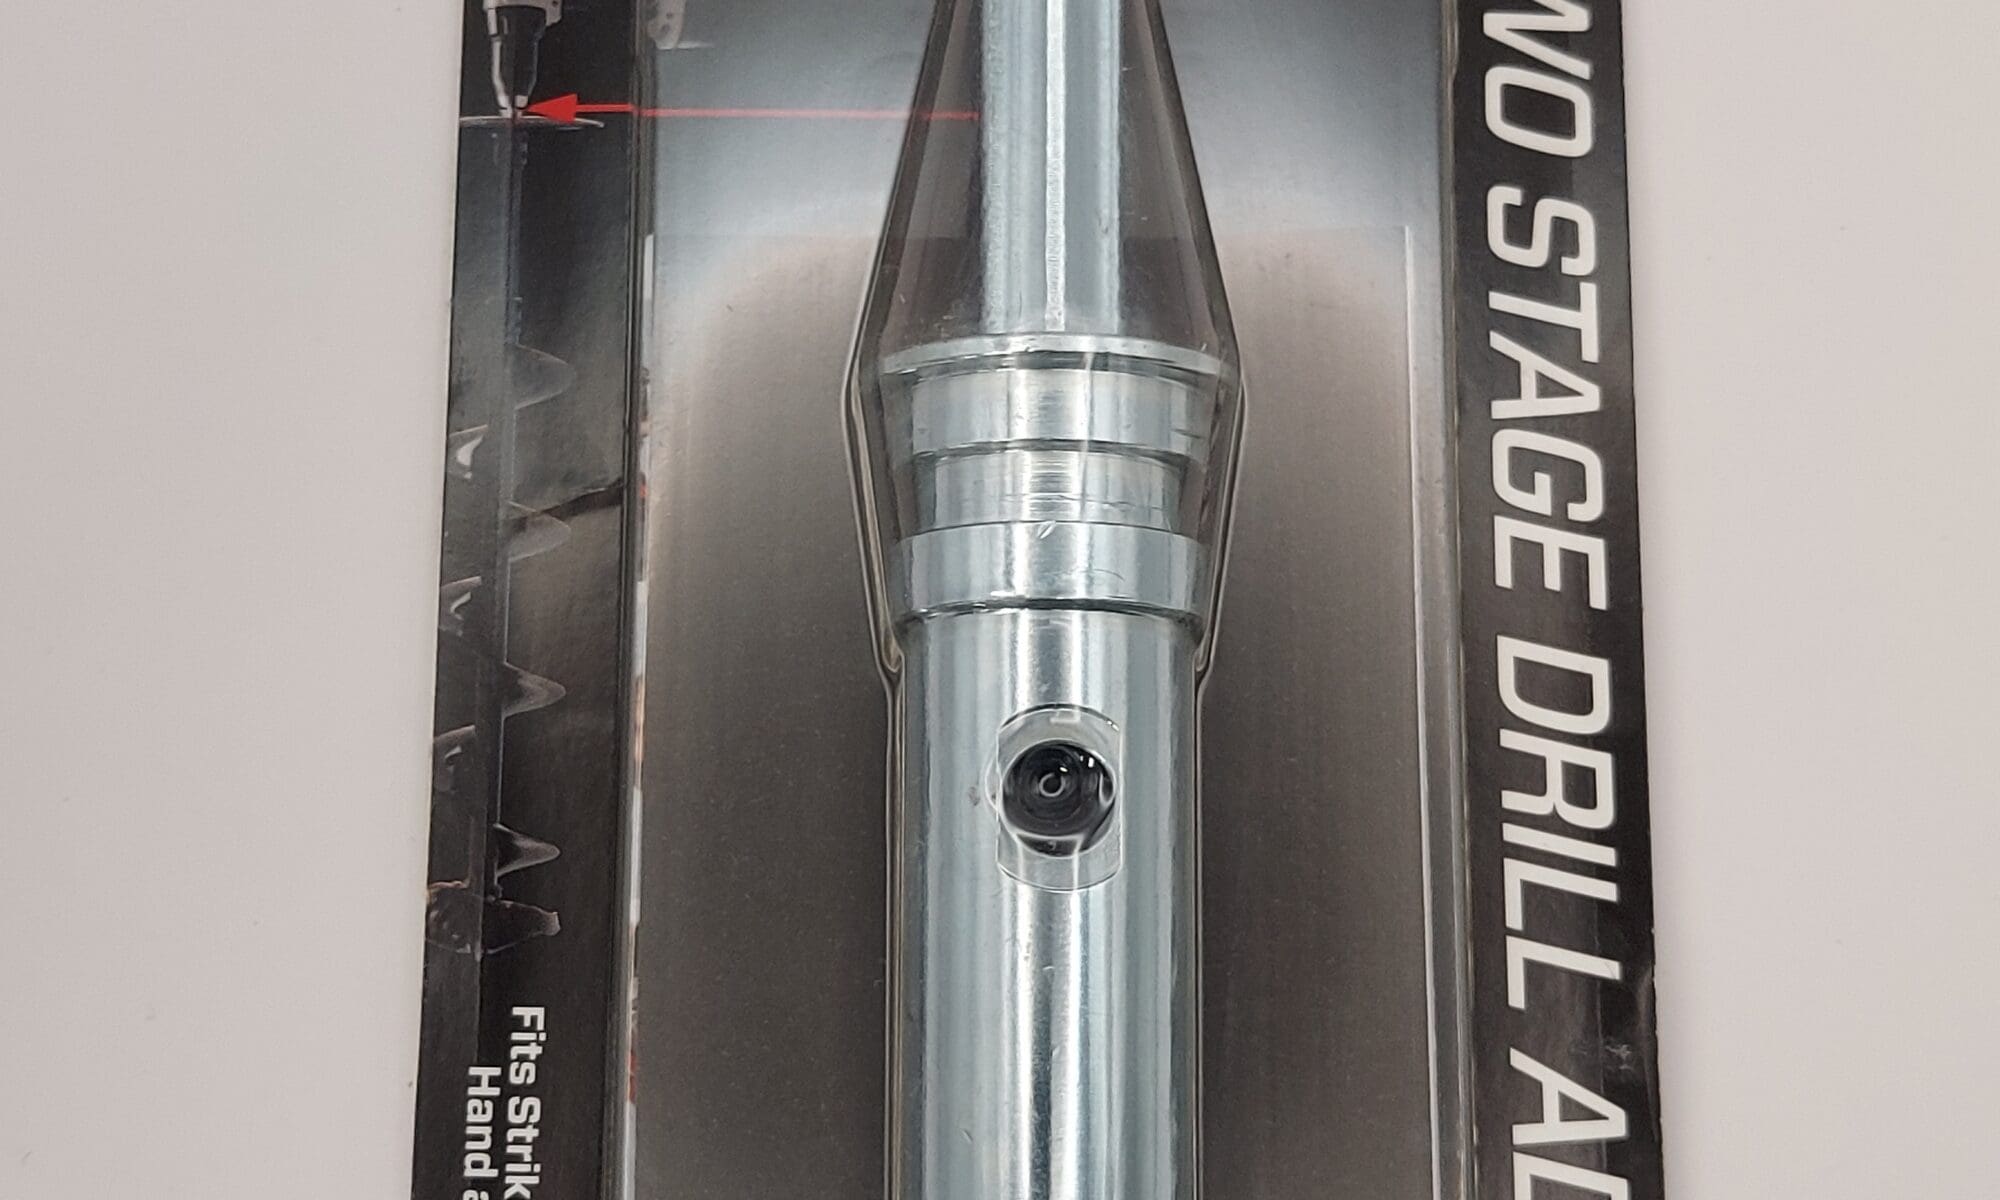 StrikeMaster Two Stage Drill Adapter for Auger Drills